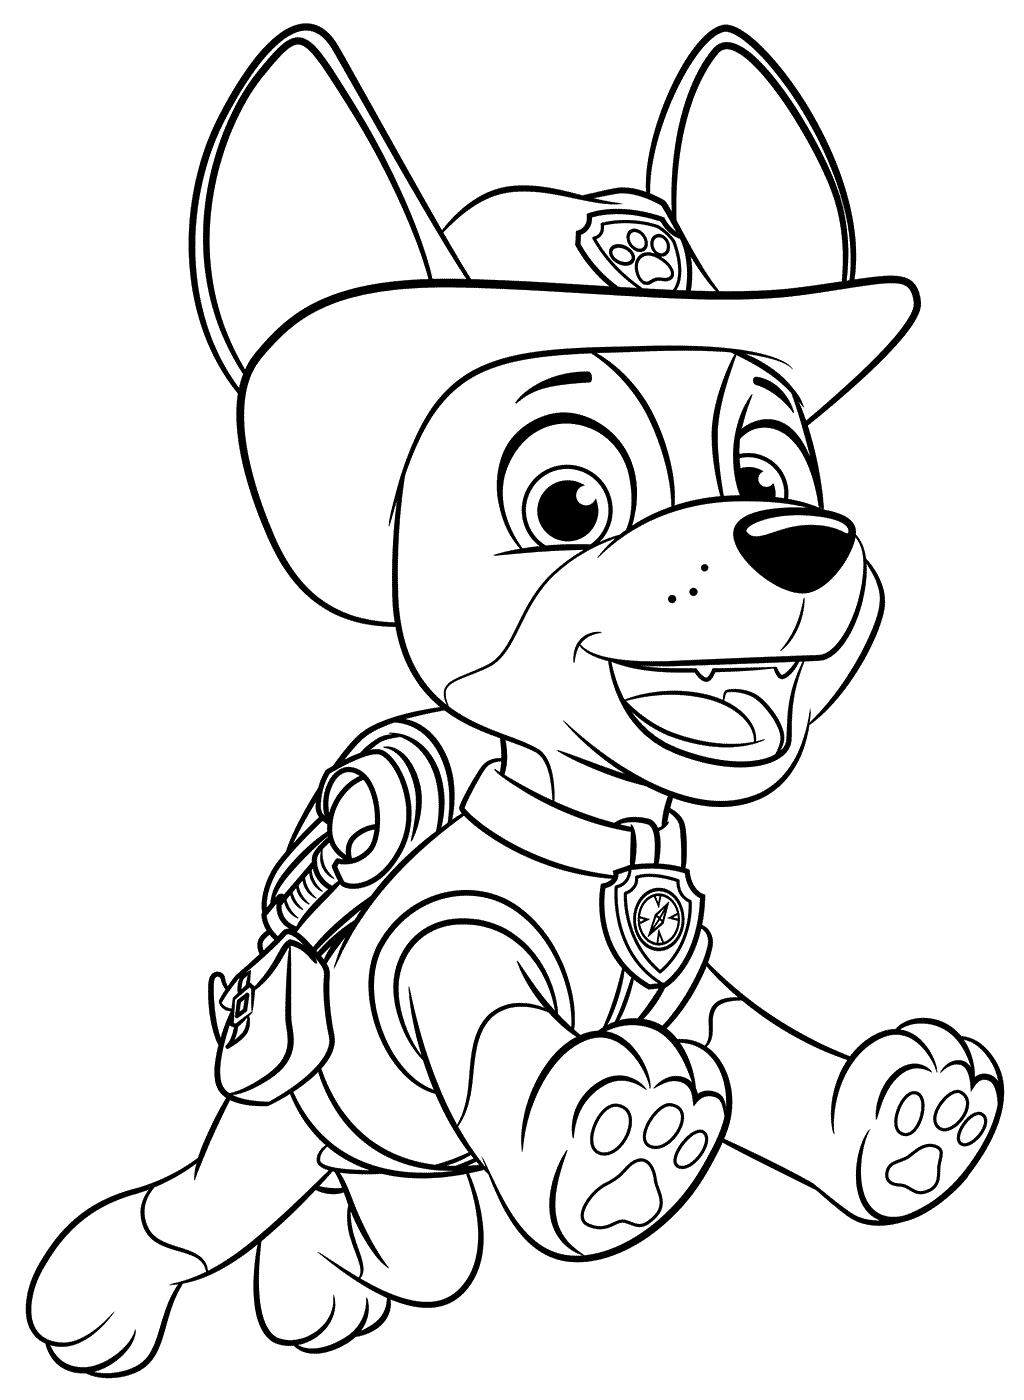 PAW Patrol Jungle Pup Tracker Coloring Page